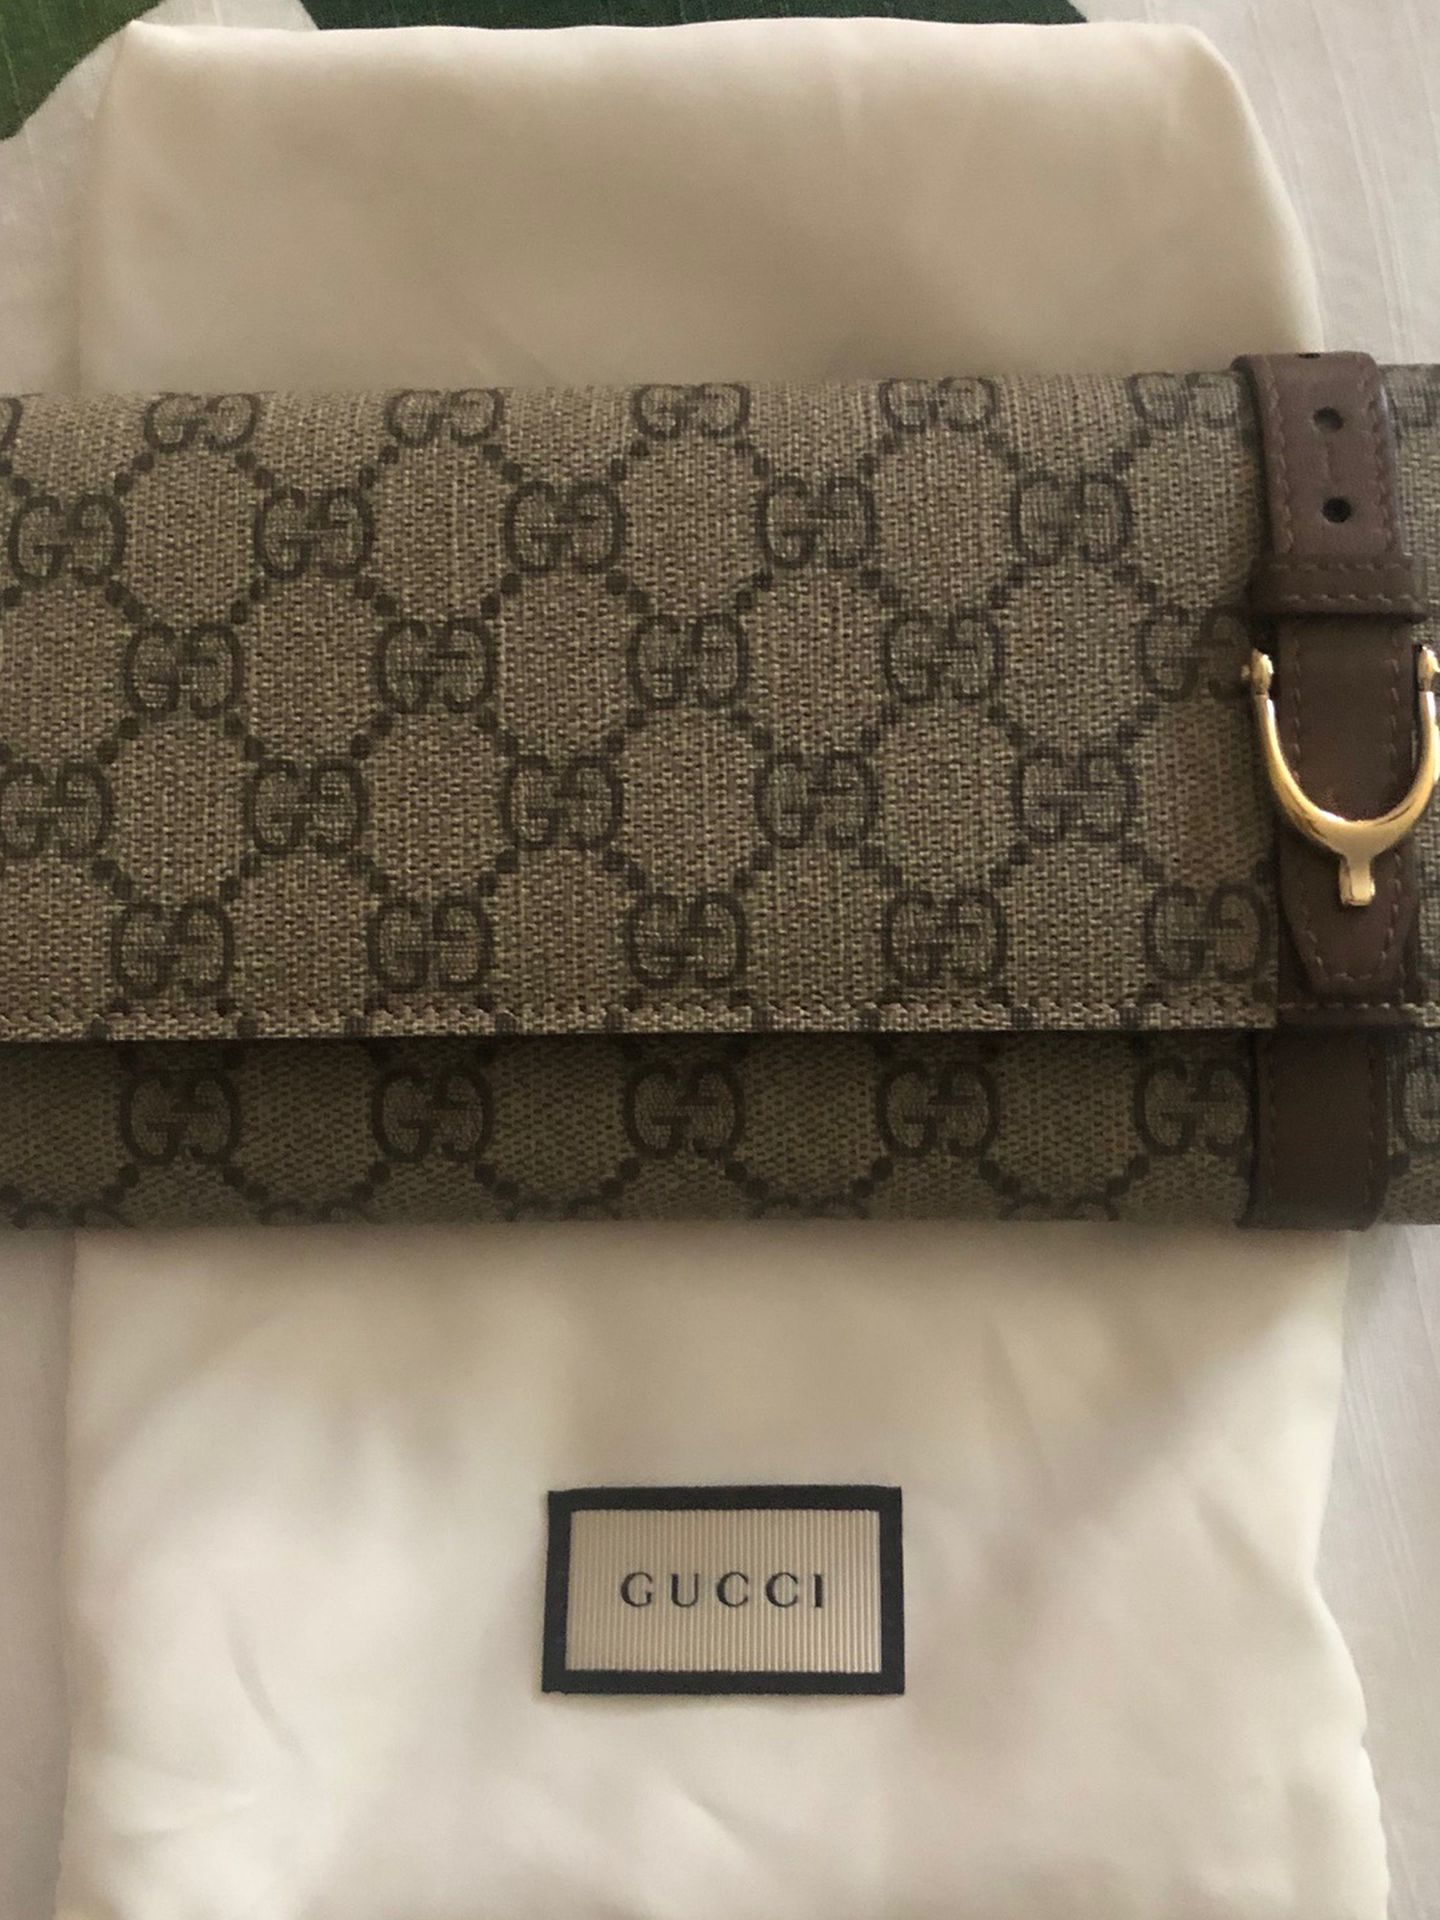 Gucci GC Wallet - Authentic - New- Includes Dust Bag And Box